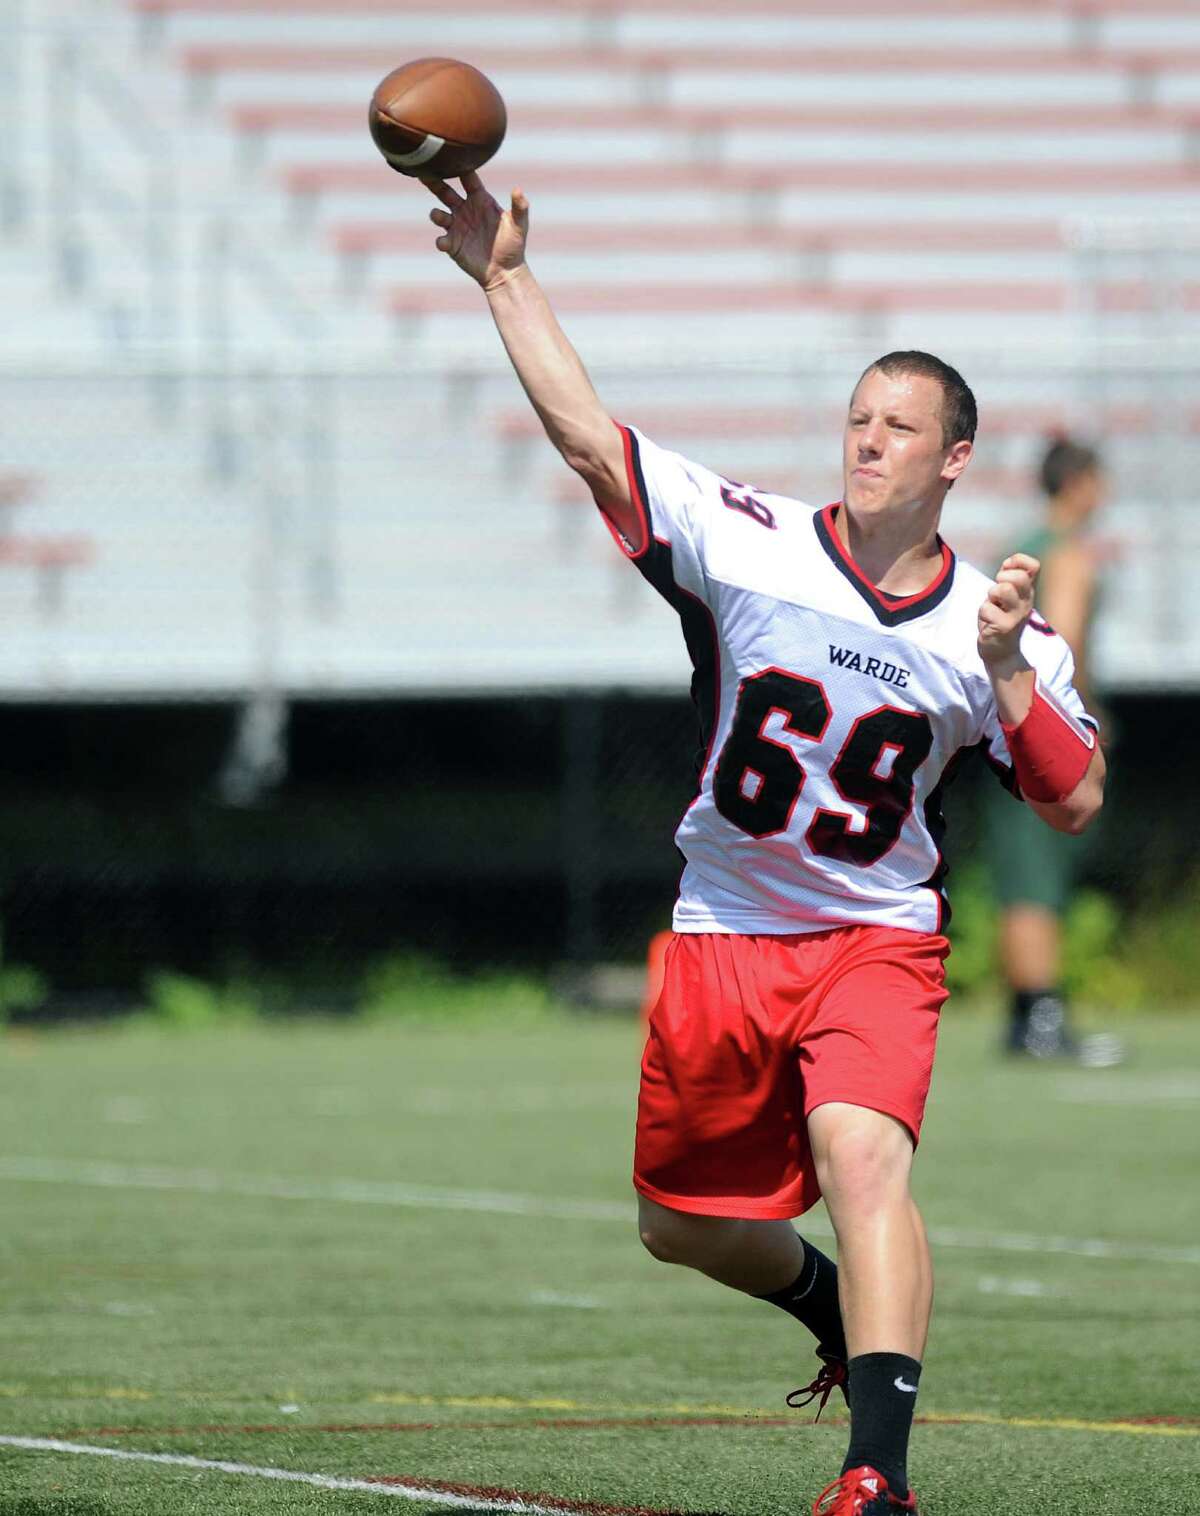 Max Garrett of Fairfield Warde High School participates in the 5th annual Connecticut Grip It and Rip It Passing Camp at New Canaan High School on Saturday, July 14, 2012.